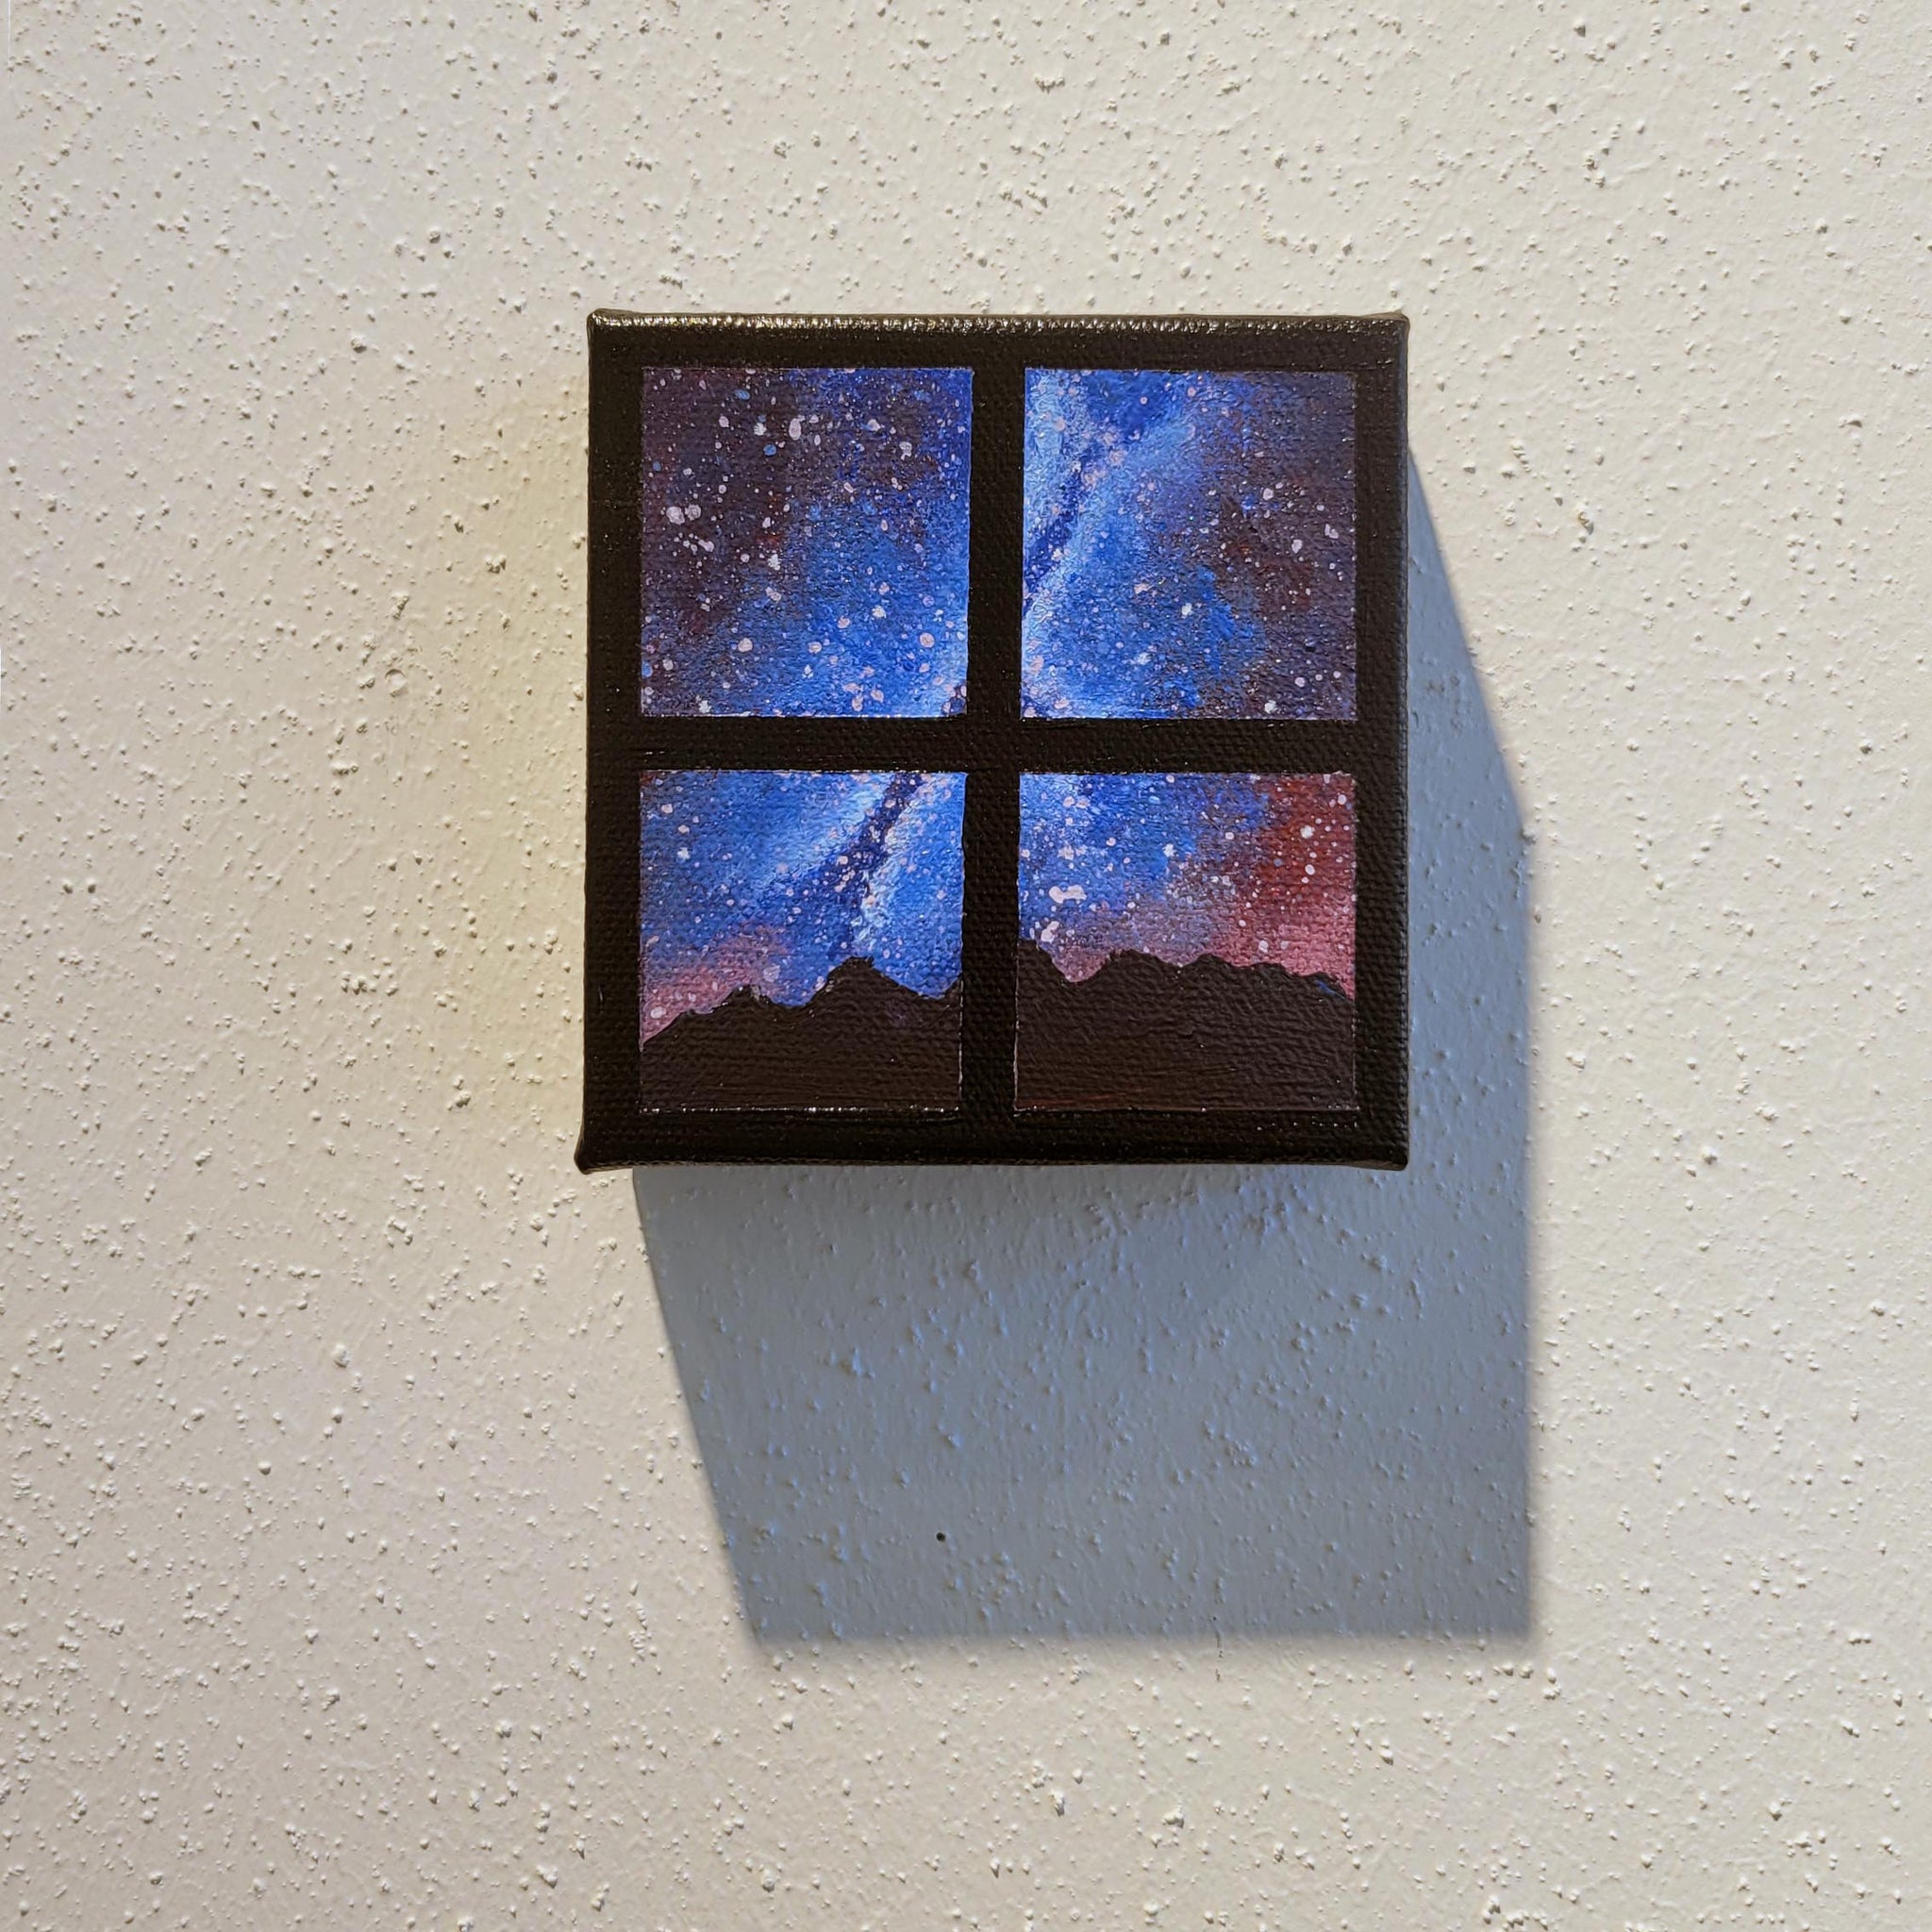 Small Windows: Night Sky Above the Moutnains